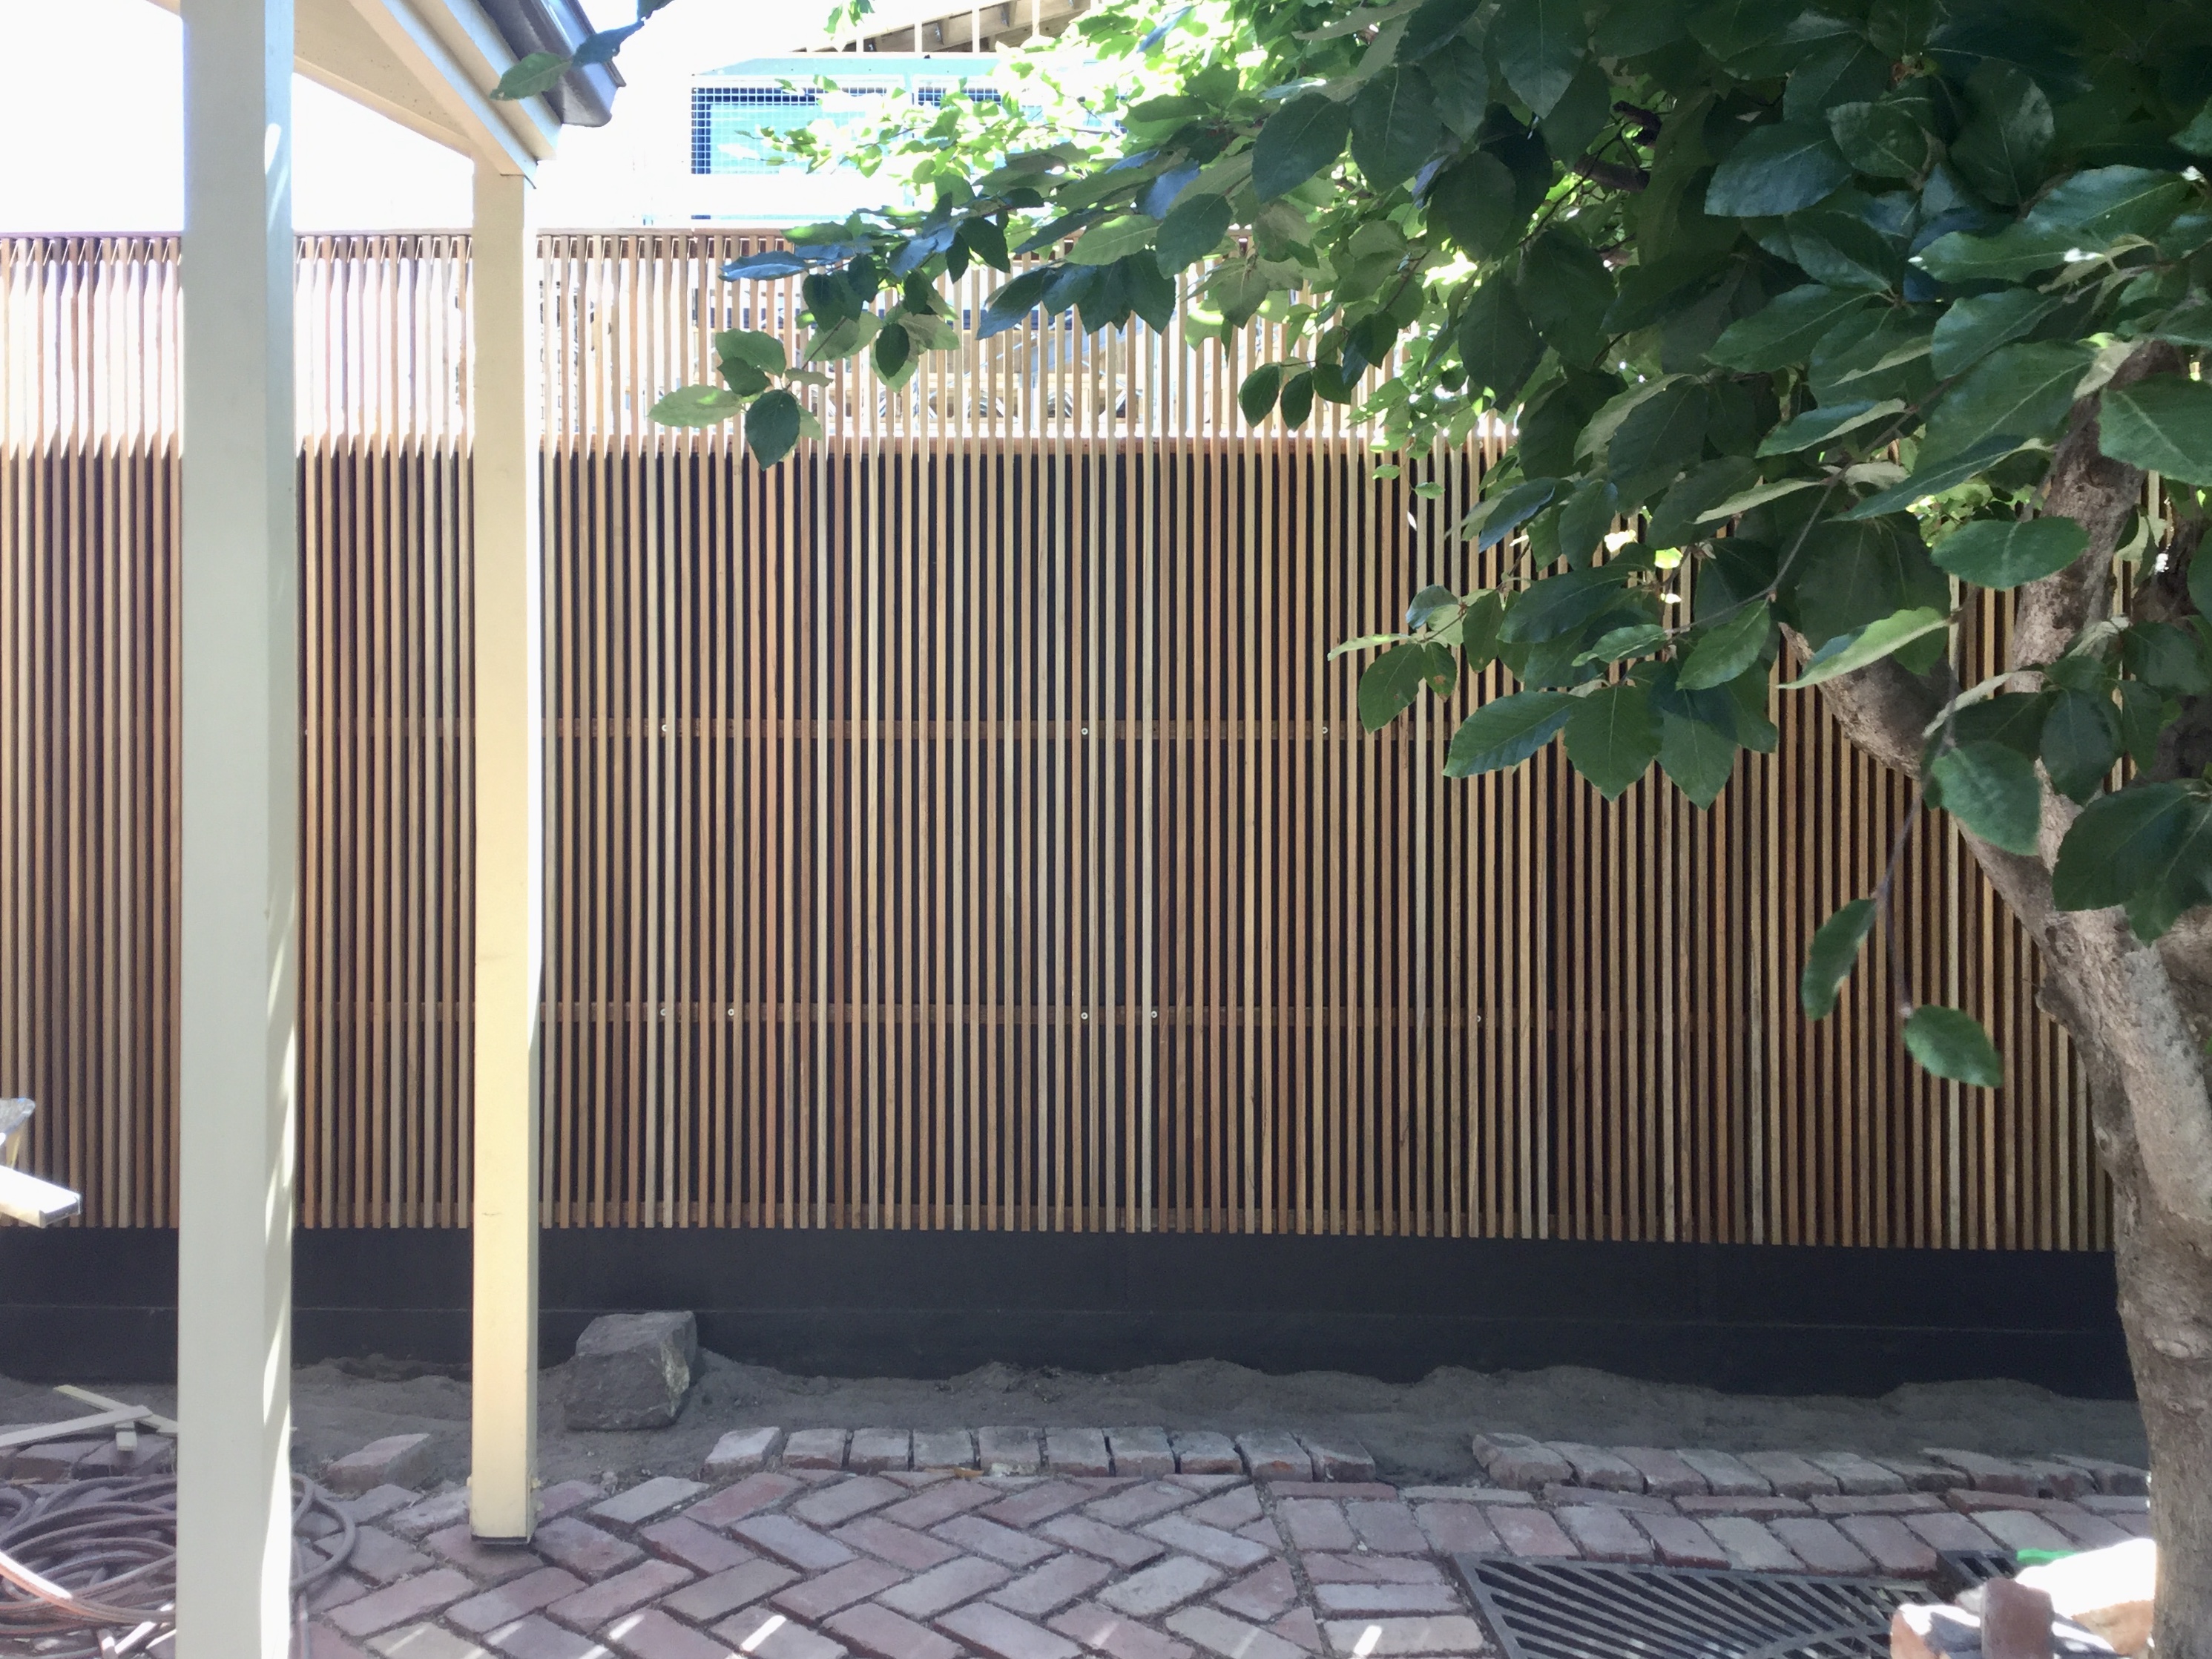 Fence Extensions